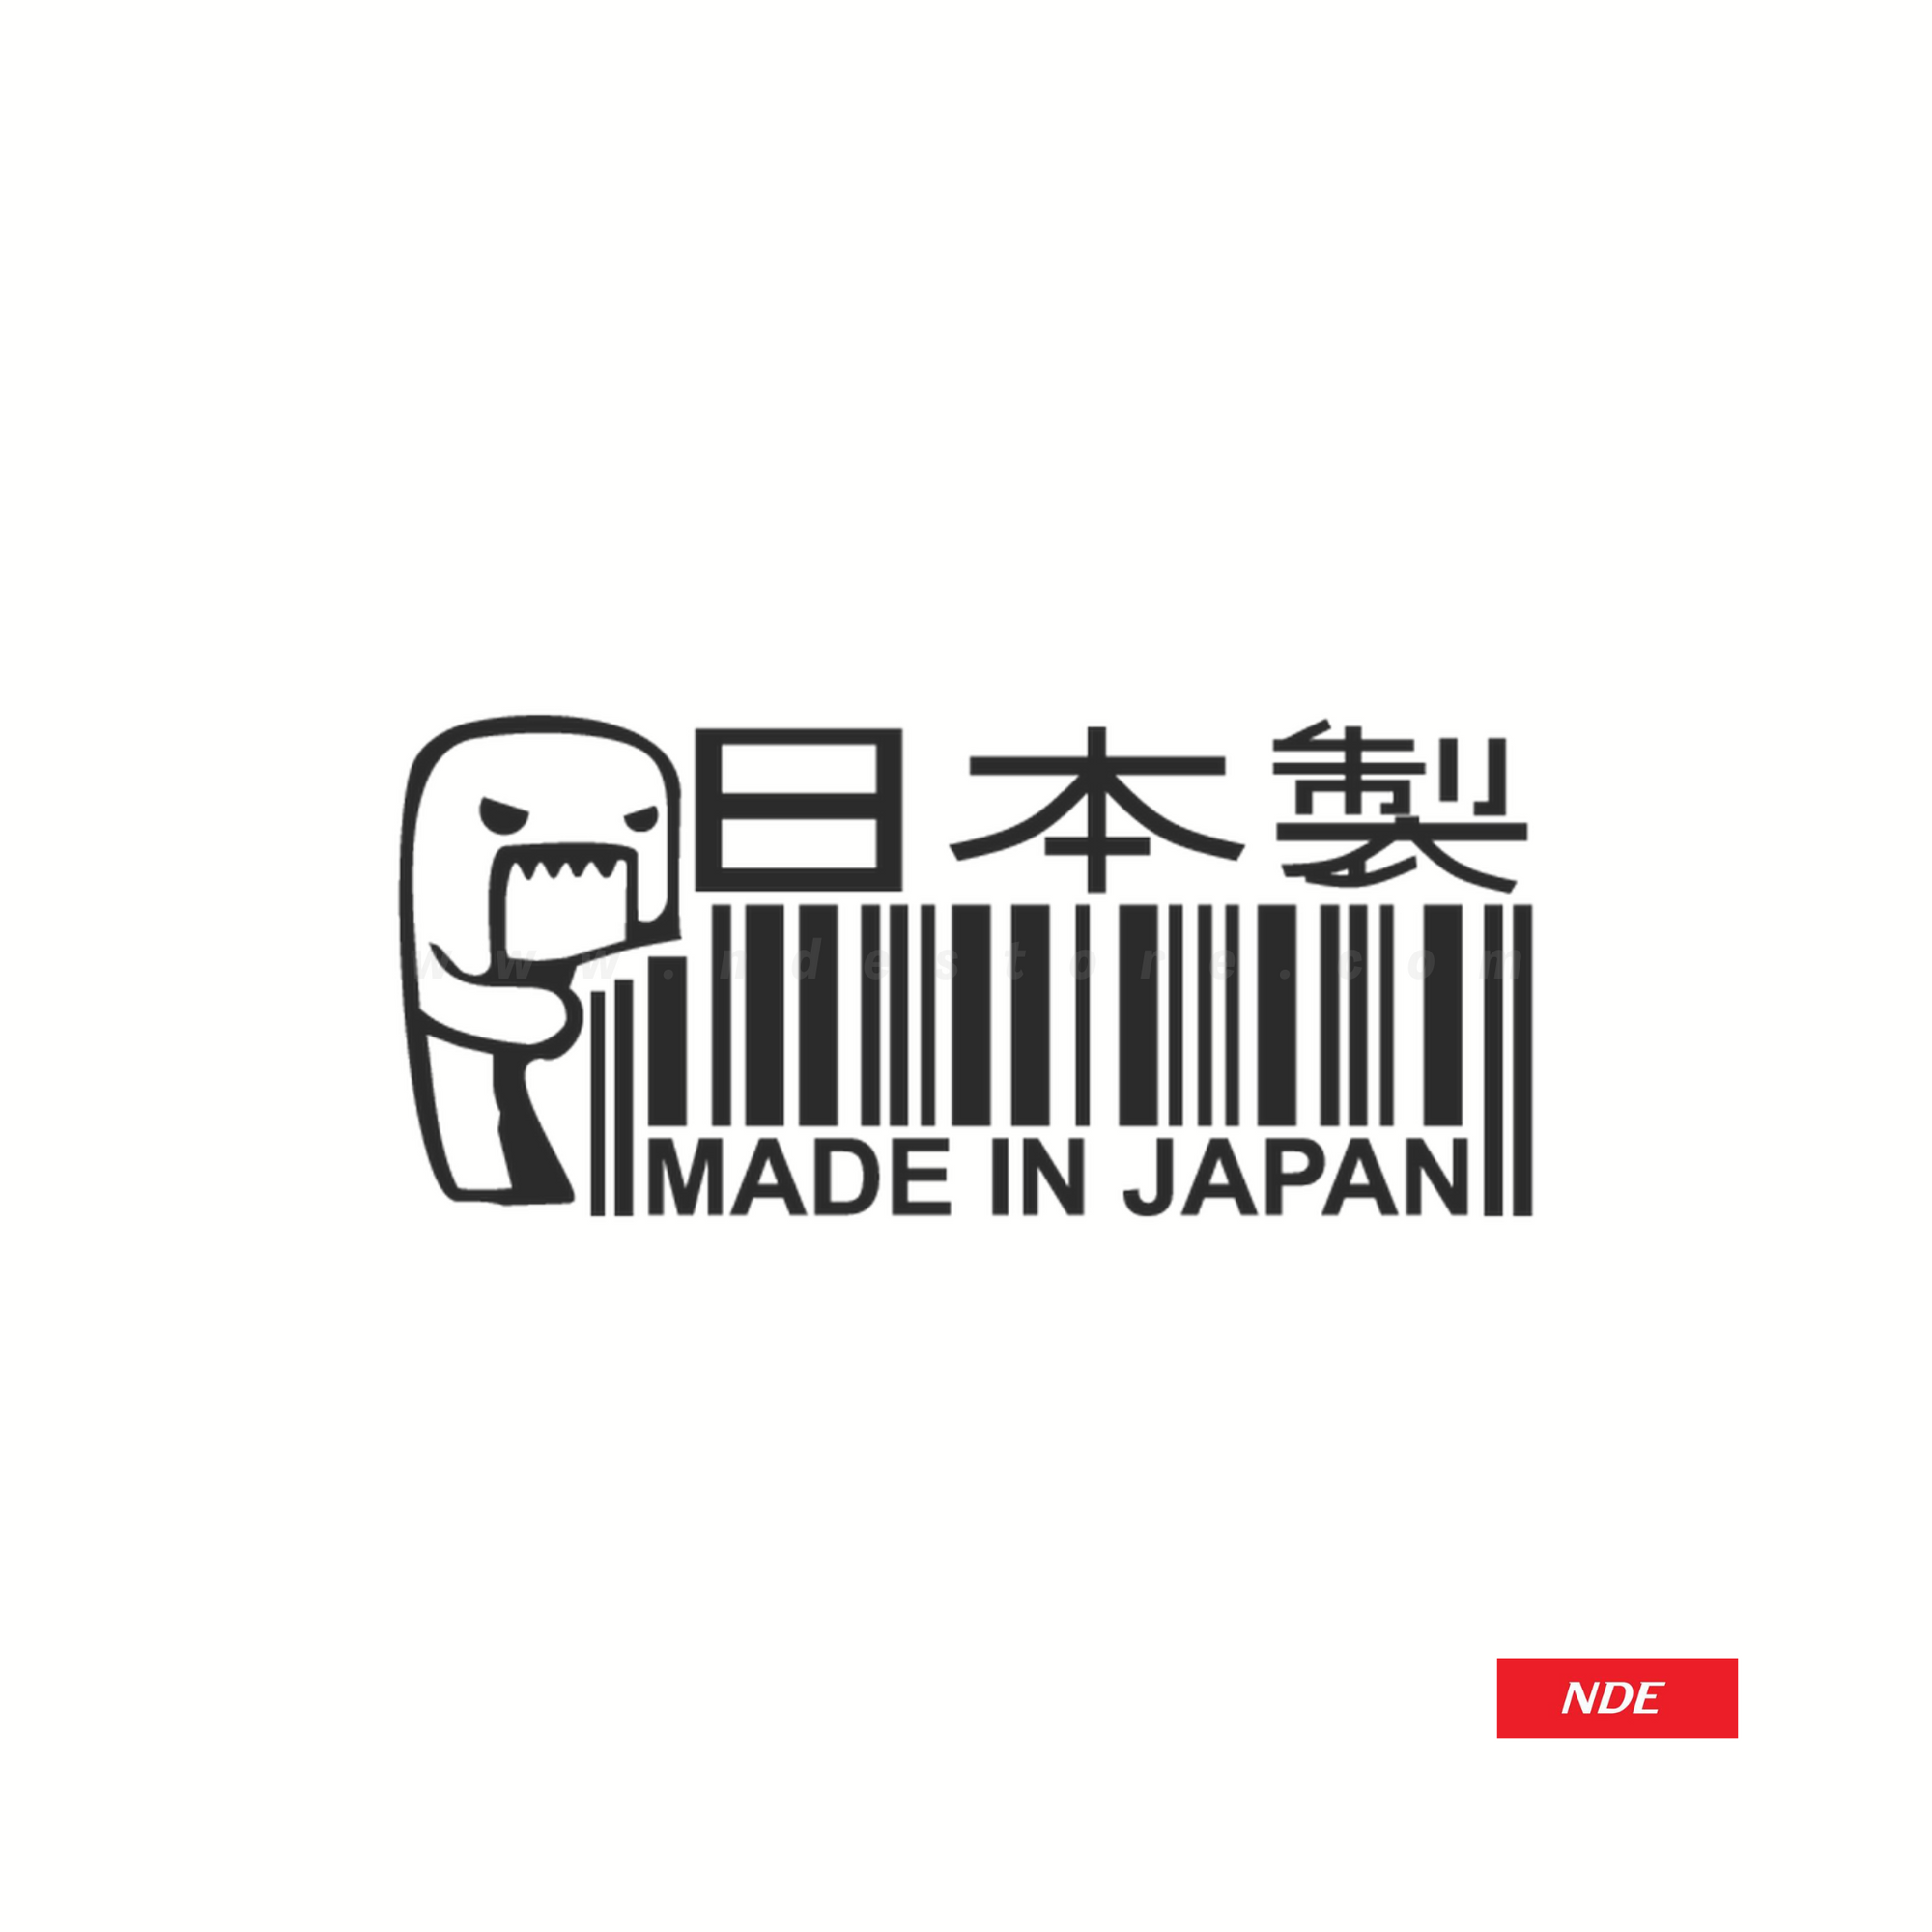 STICKER, MADE IN JAPAN DECAL (BLACK)